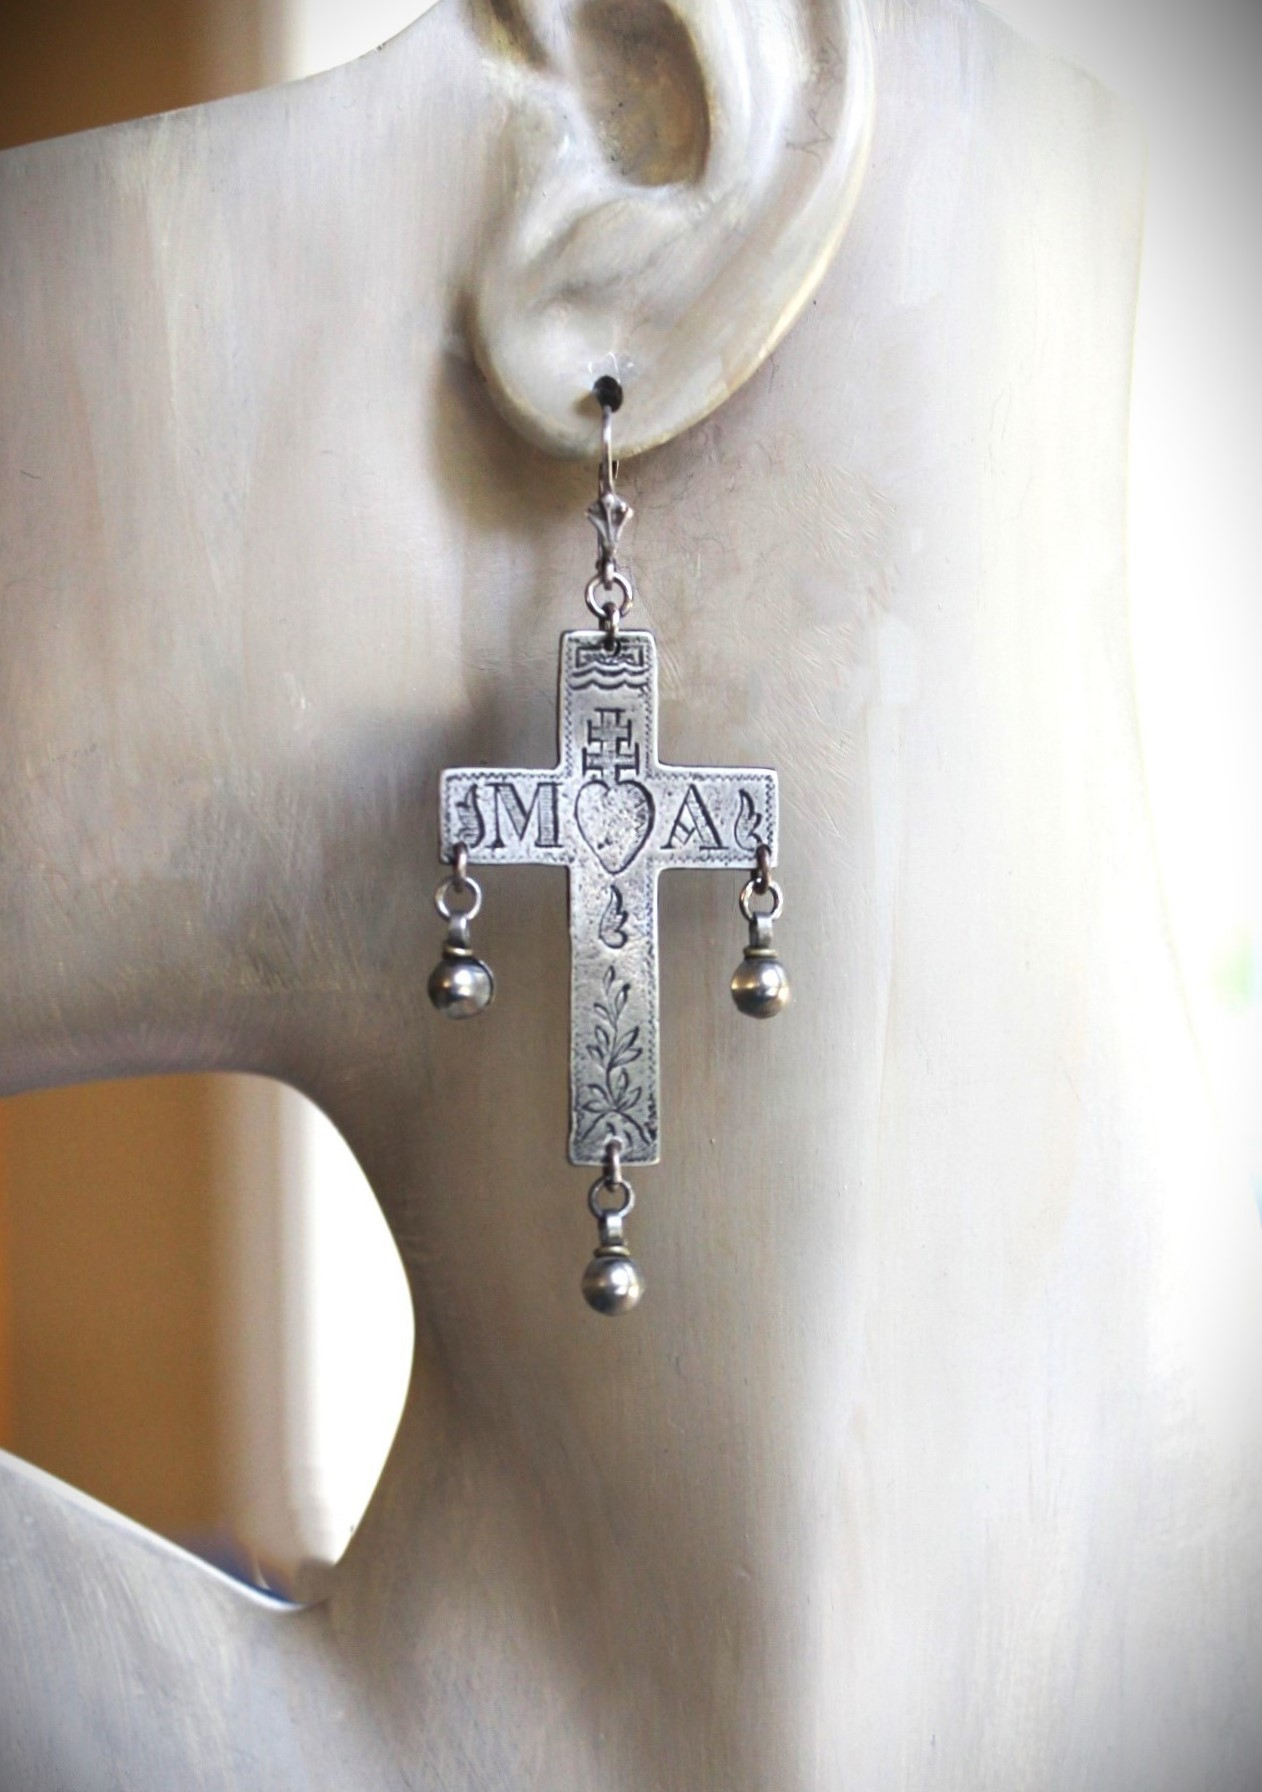 Merciful Mother Earrings with Engraved Silver French Crosses, Tiny Orb Drops and Sterling Leverback Earring Wires